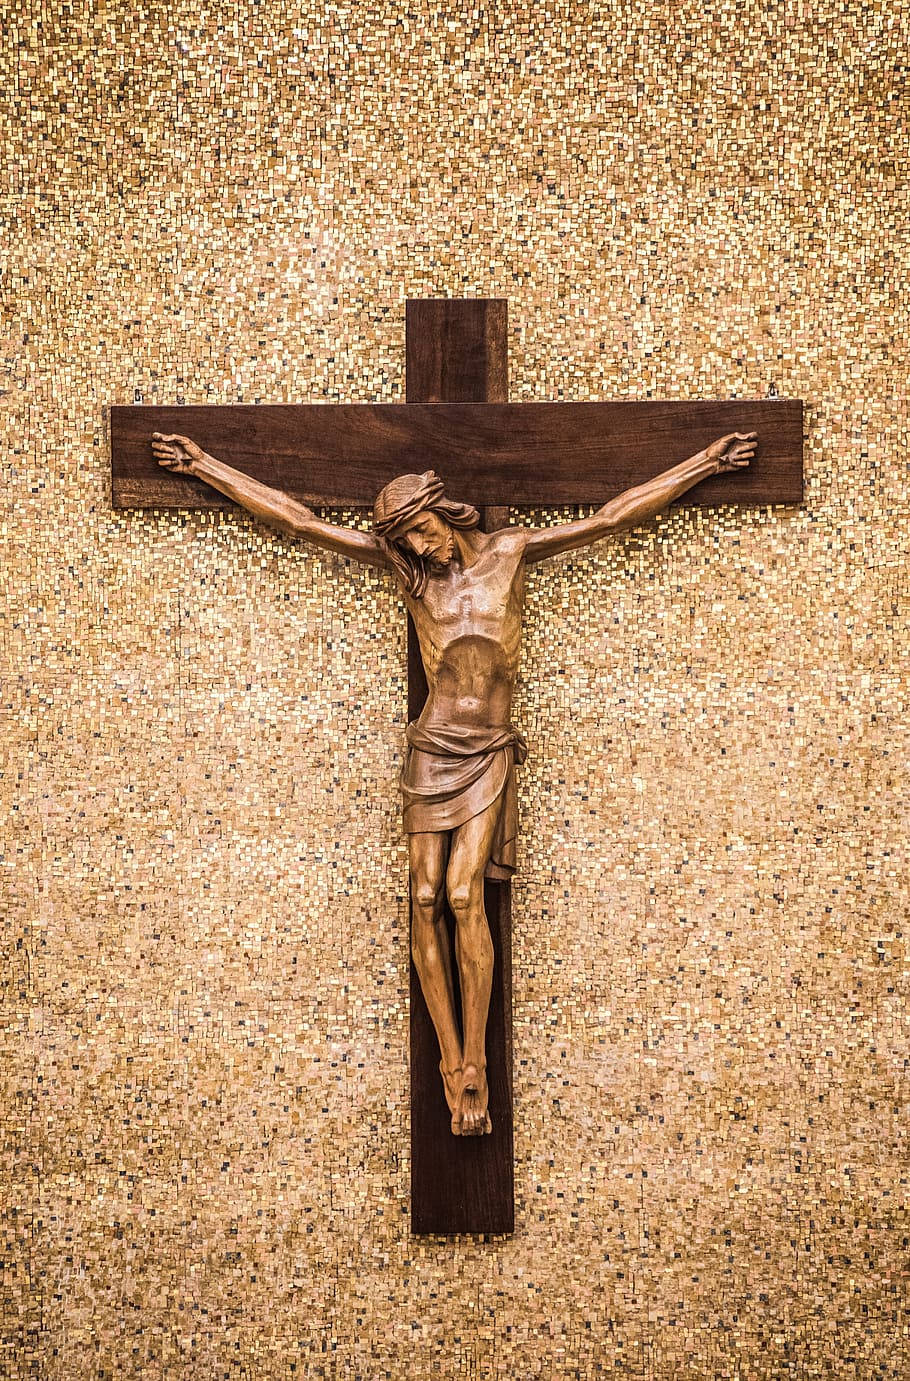 Crucifixion Statue Against Mosaic Background Wallpaper